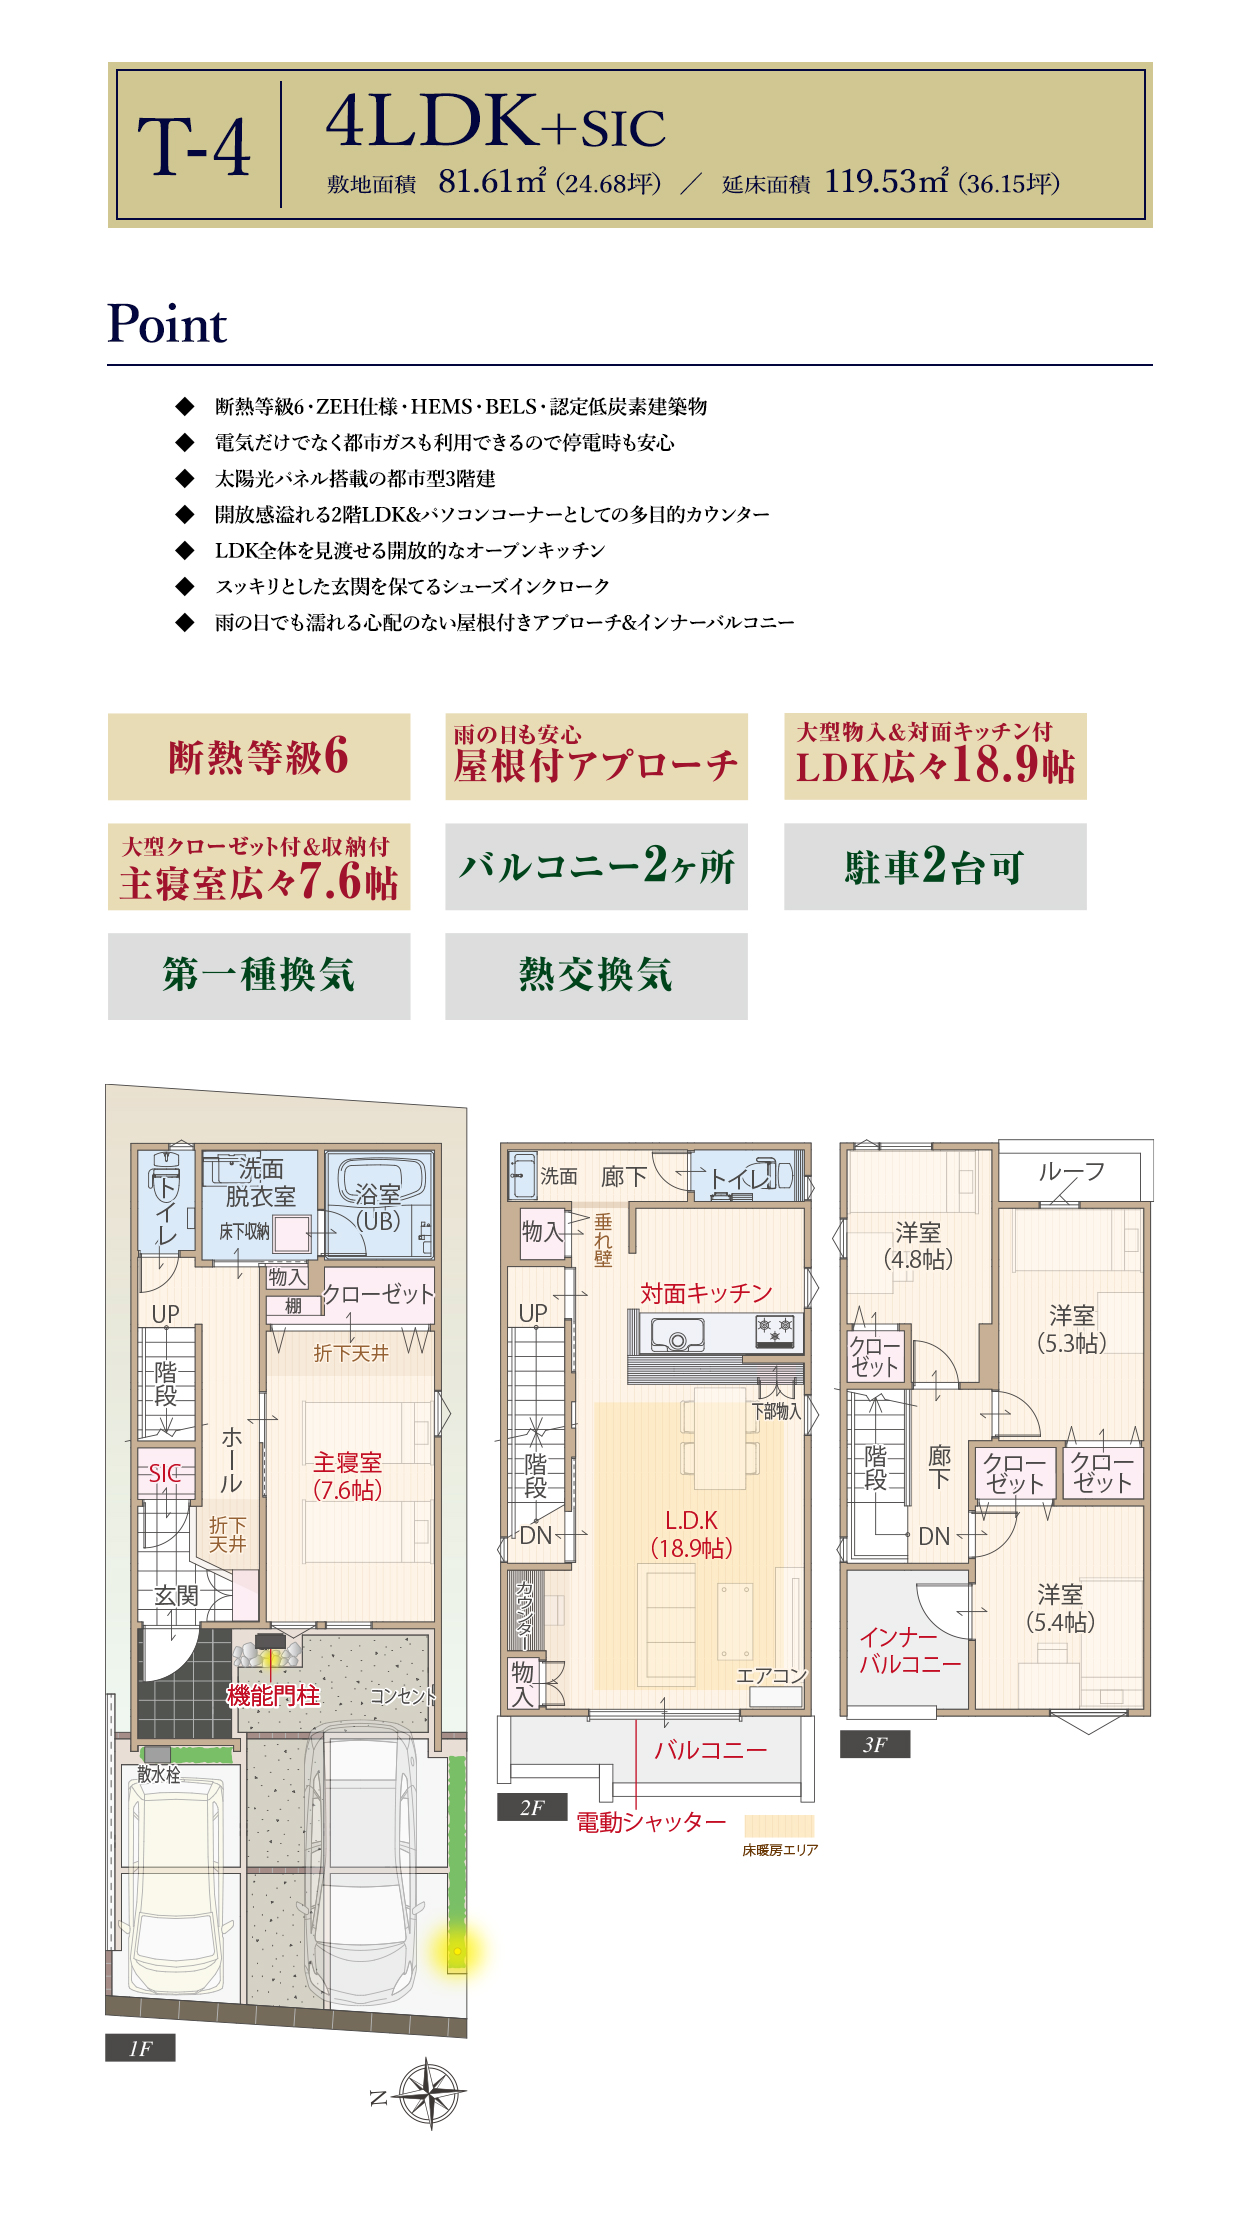 East Park Front　西区上小田井　T-4　間取り図